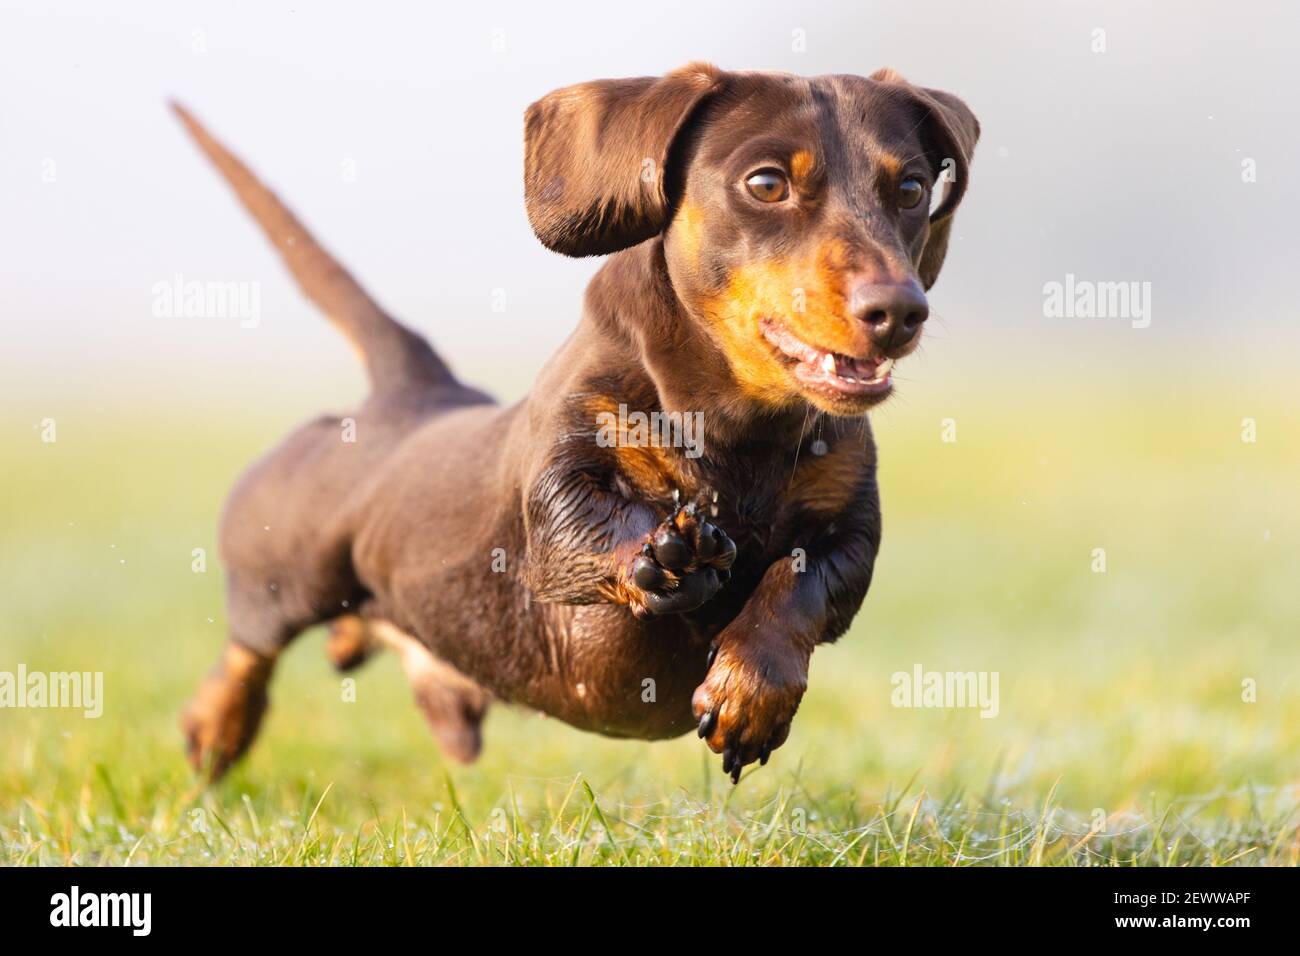 An action photograph of Max the cute Miniature Dachshund dog smiling, waving and running after his ball on the grass in the park! Stock Photo